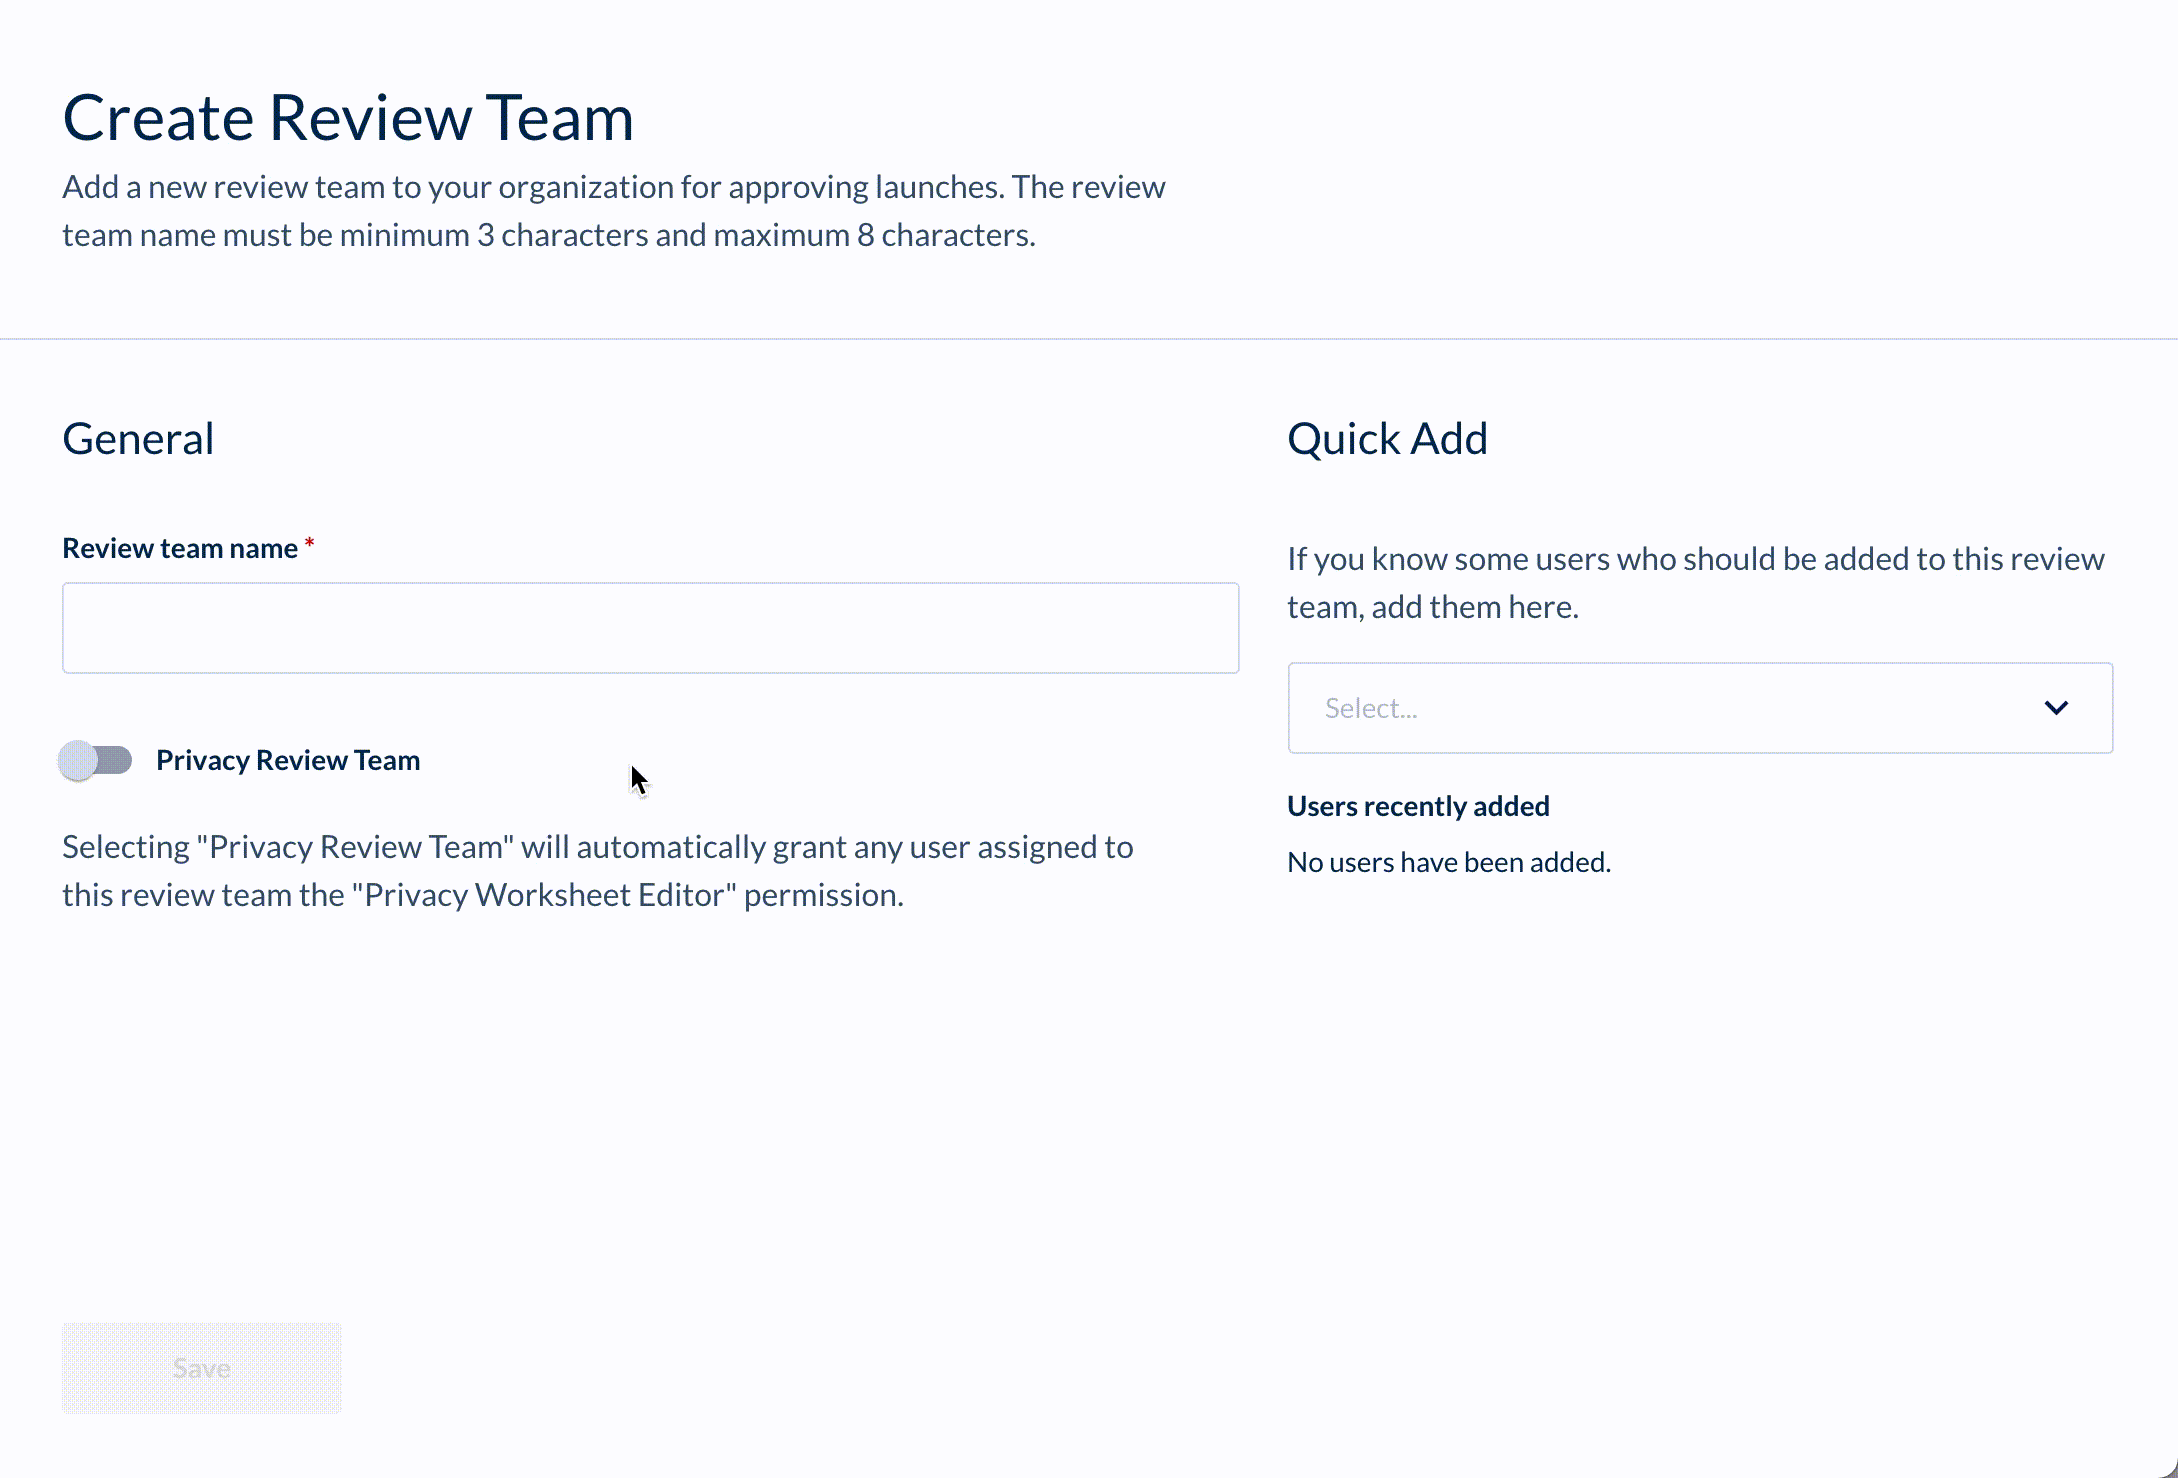 Create review teams page. 